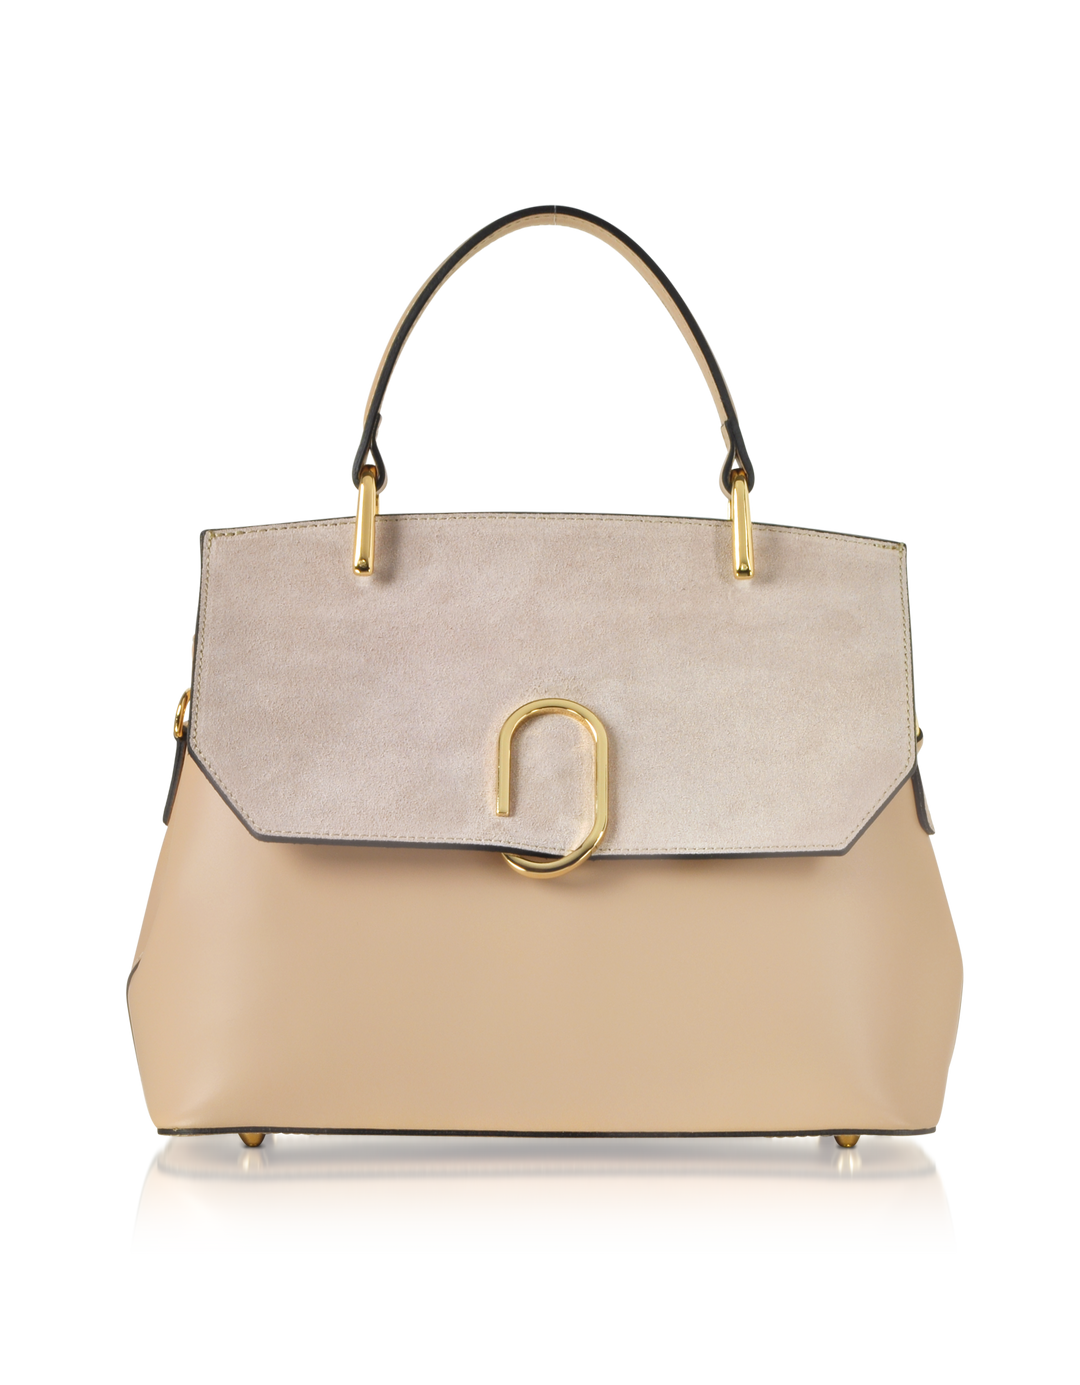 Tan and beige designer handbag with gold accents and top handle